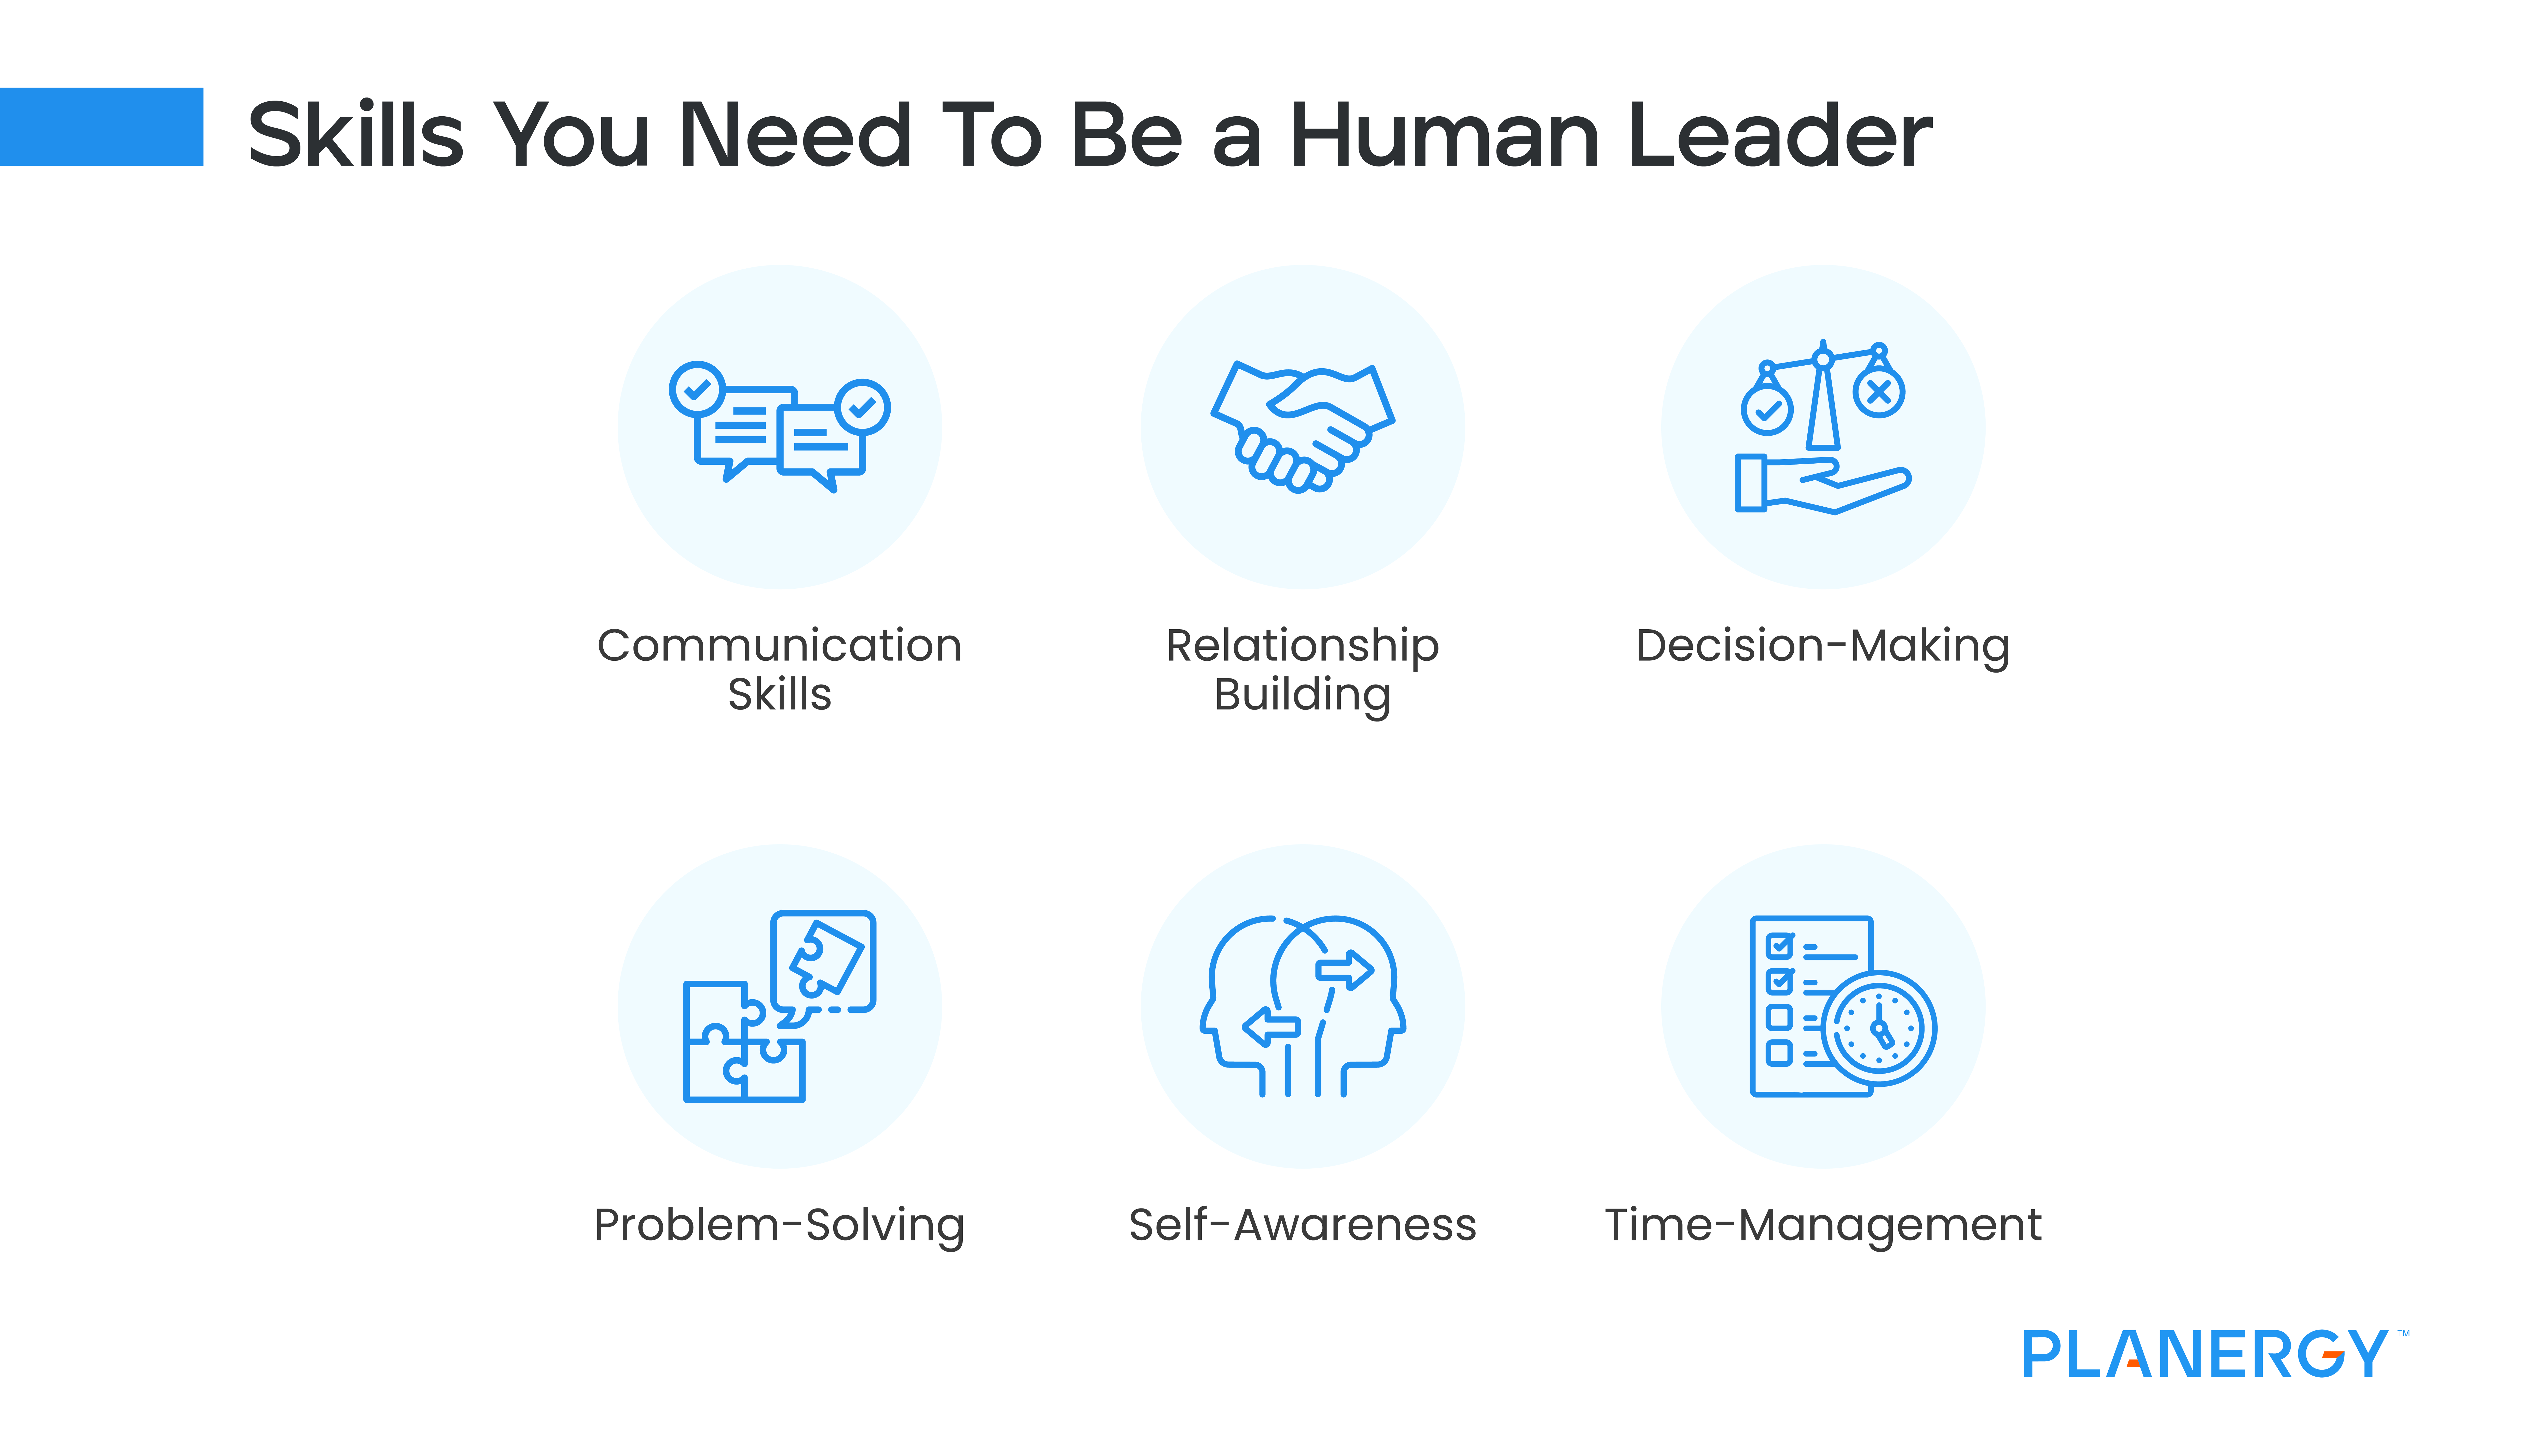 Skills you Need to be a Human Leader